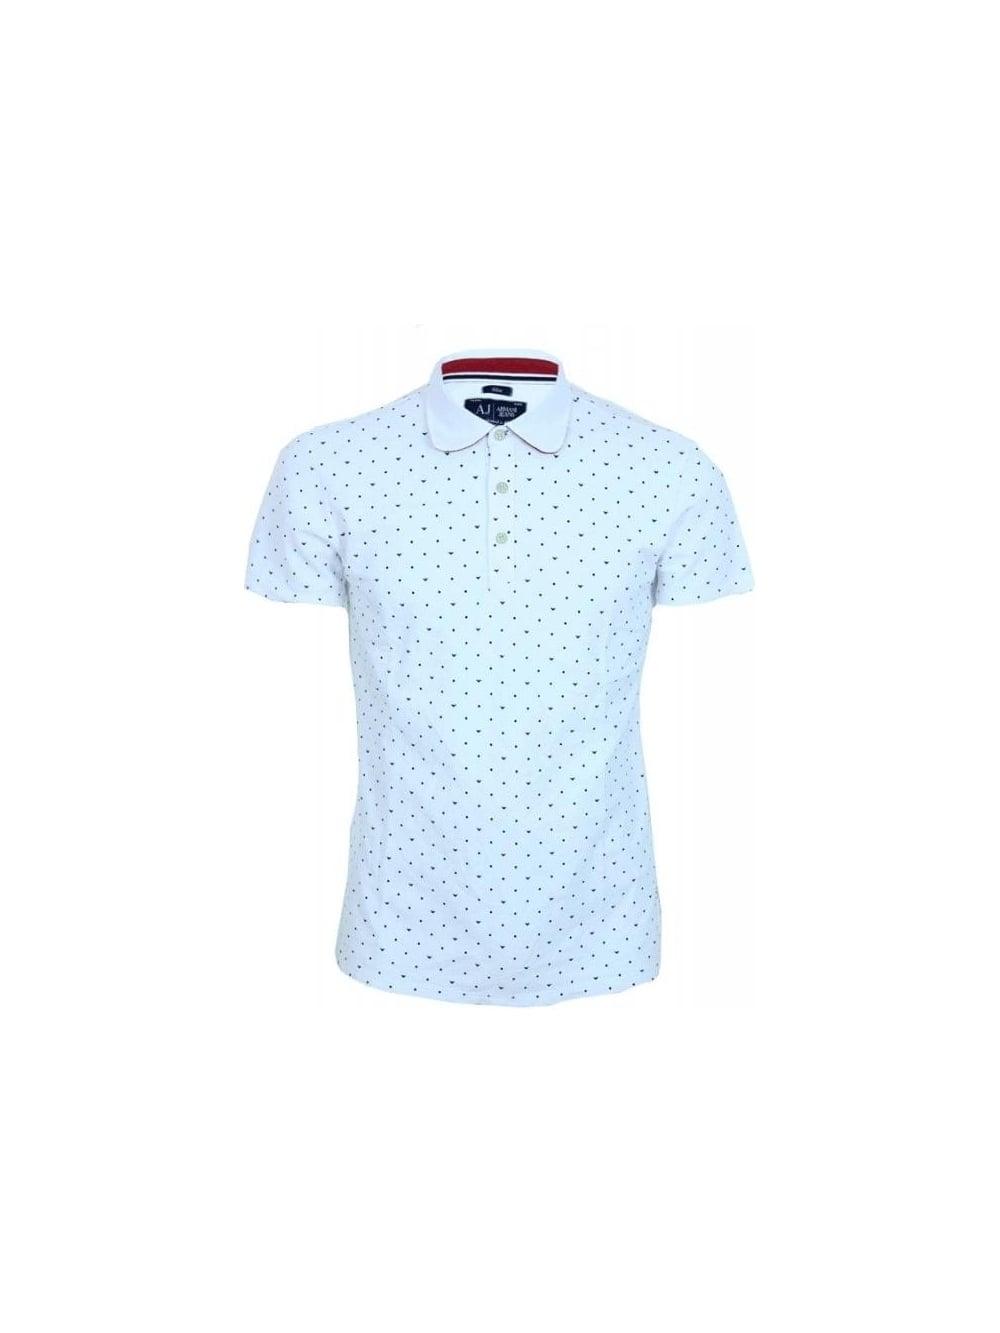 White and Blue Dot Logo - Armani Jean Dot Logo Slim Fit Polo in White - Northern Threads